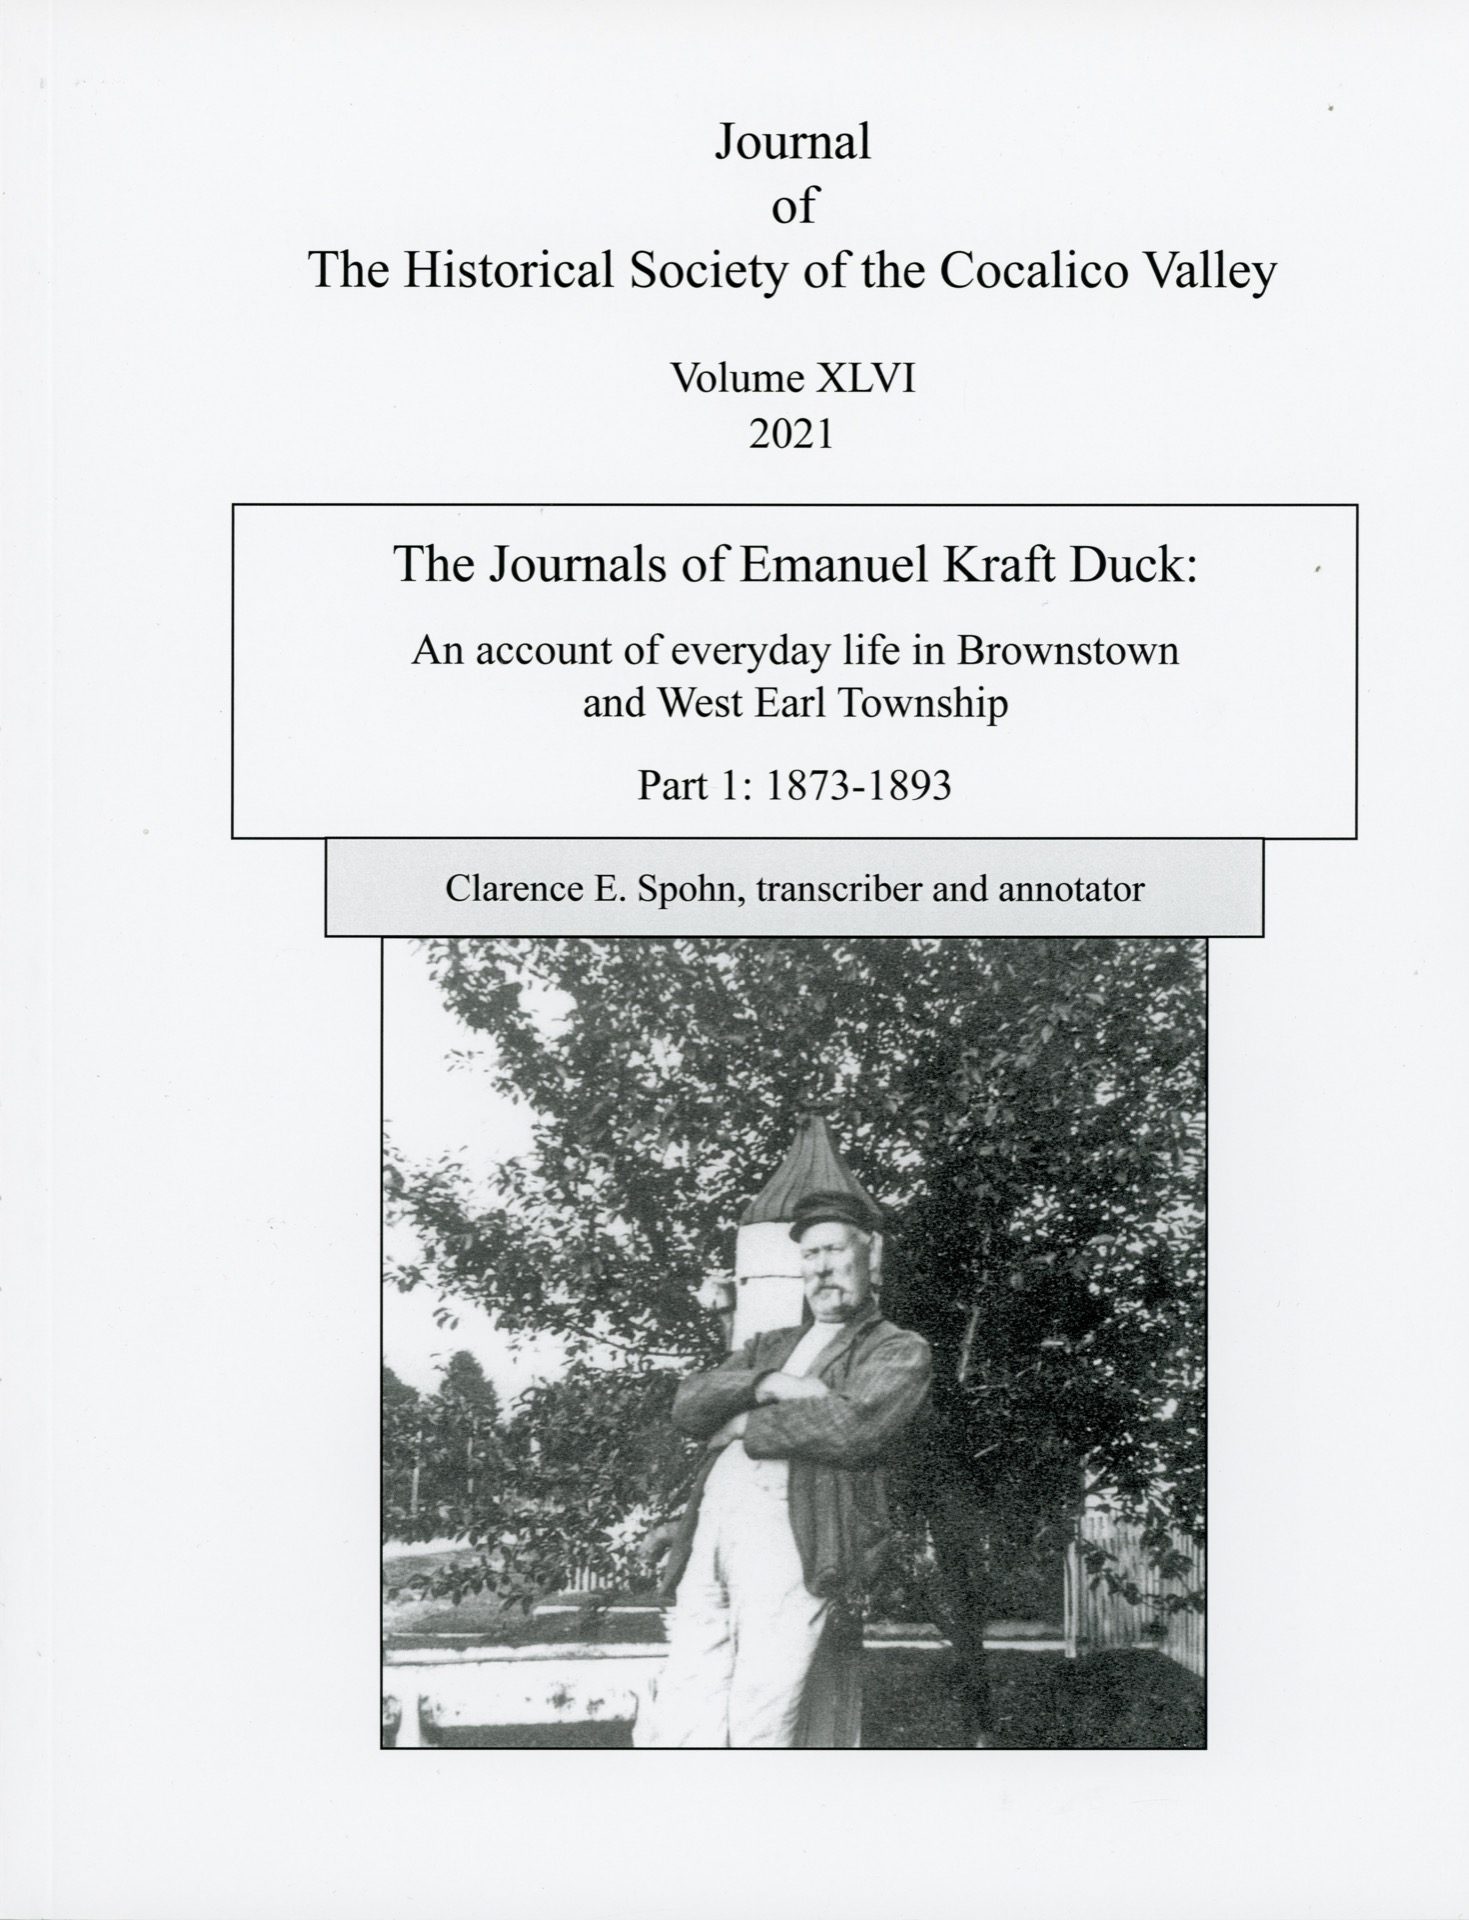 Vol. XLVI: “The Journals of Emanuel Kraft Duck: An Account of Everyday Life in Brownstown and West Earl Township; Part 1: 1873-1893,” transcribed and annotated by Clarence E. Spohn.